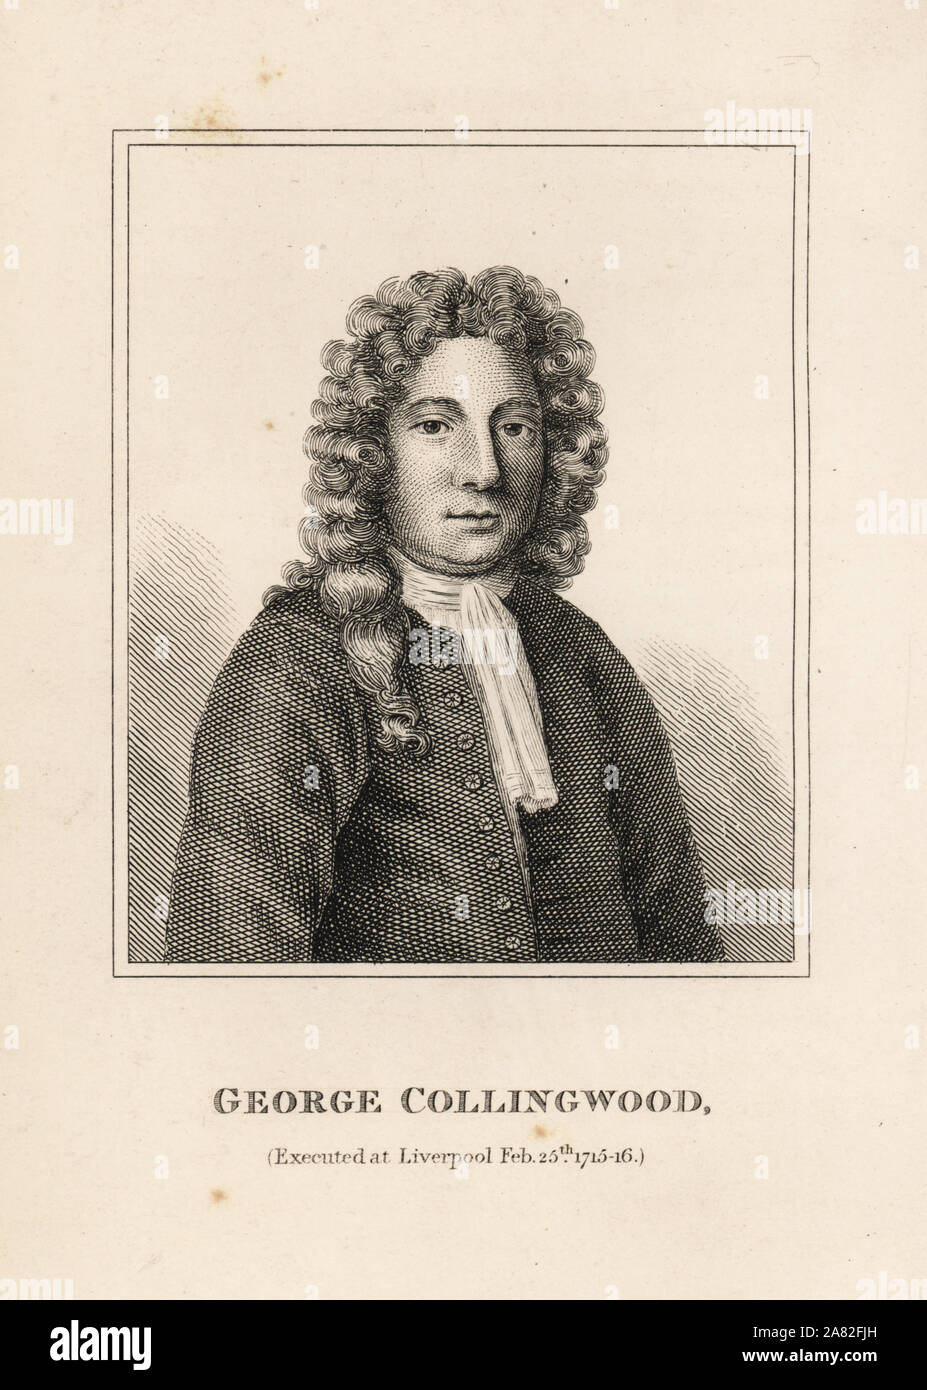 George Collingwood, rebel supporter of James Stuart the Pretender, executed for treason, Liverpool, 1716. Engraving from James Caulfield's Portraits, Memoirs and Characters of Remarkable Persons, London, 1819. Stock Photo